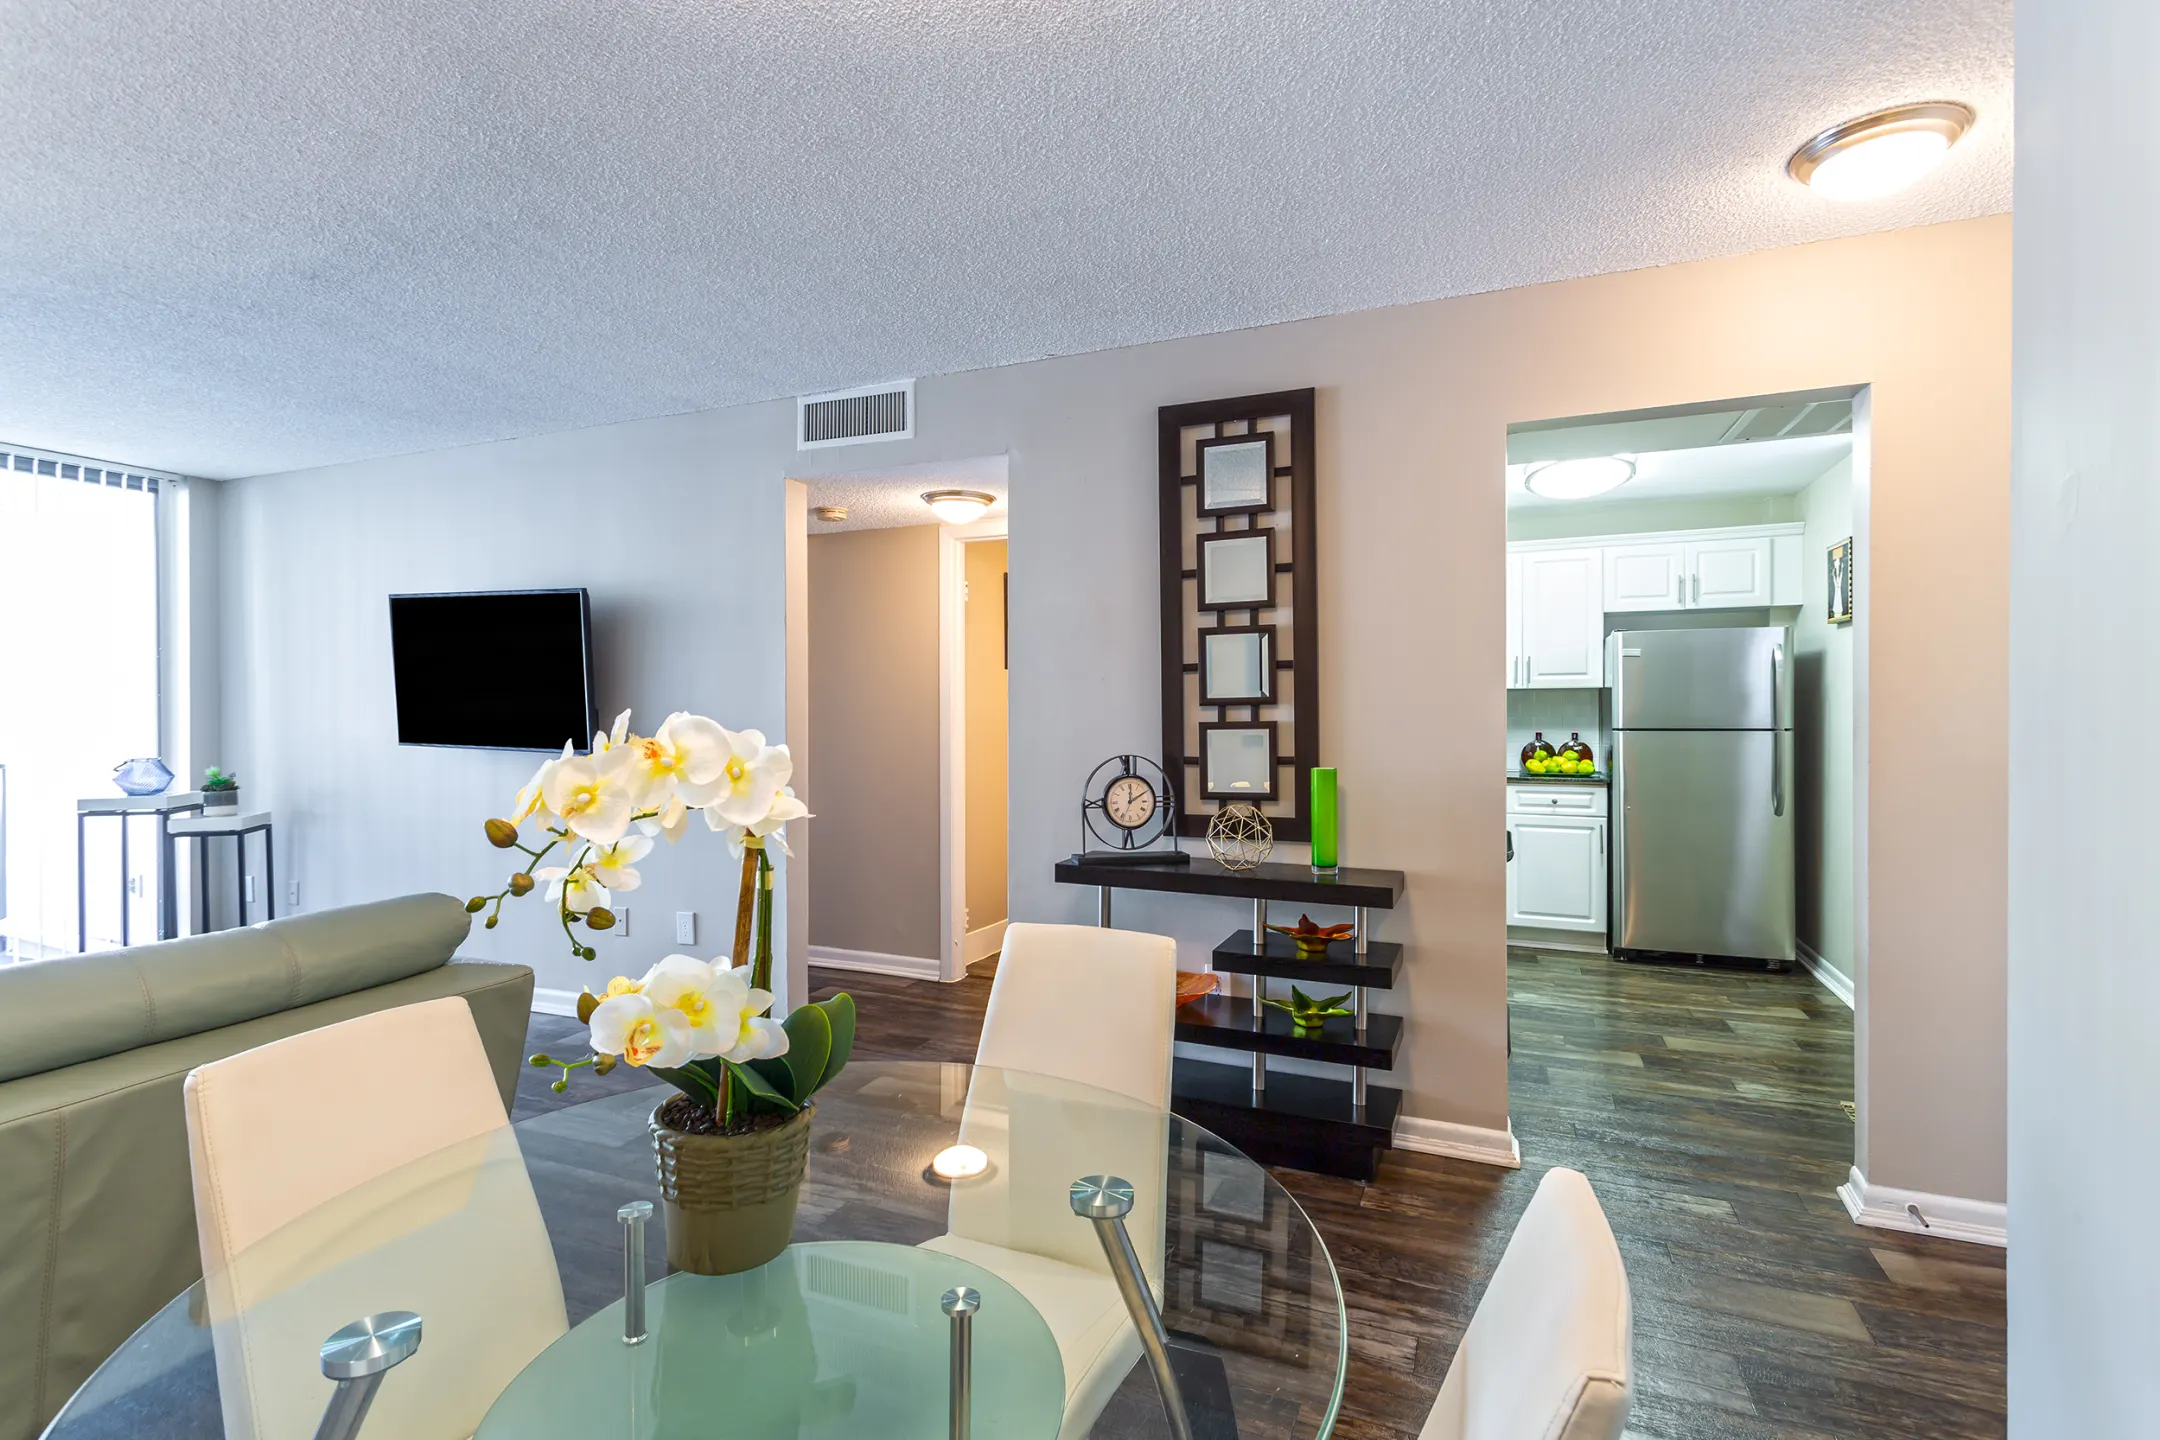 Living Room - Biscayne Apartments - North Miami, FL